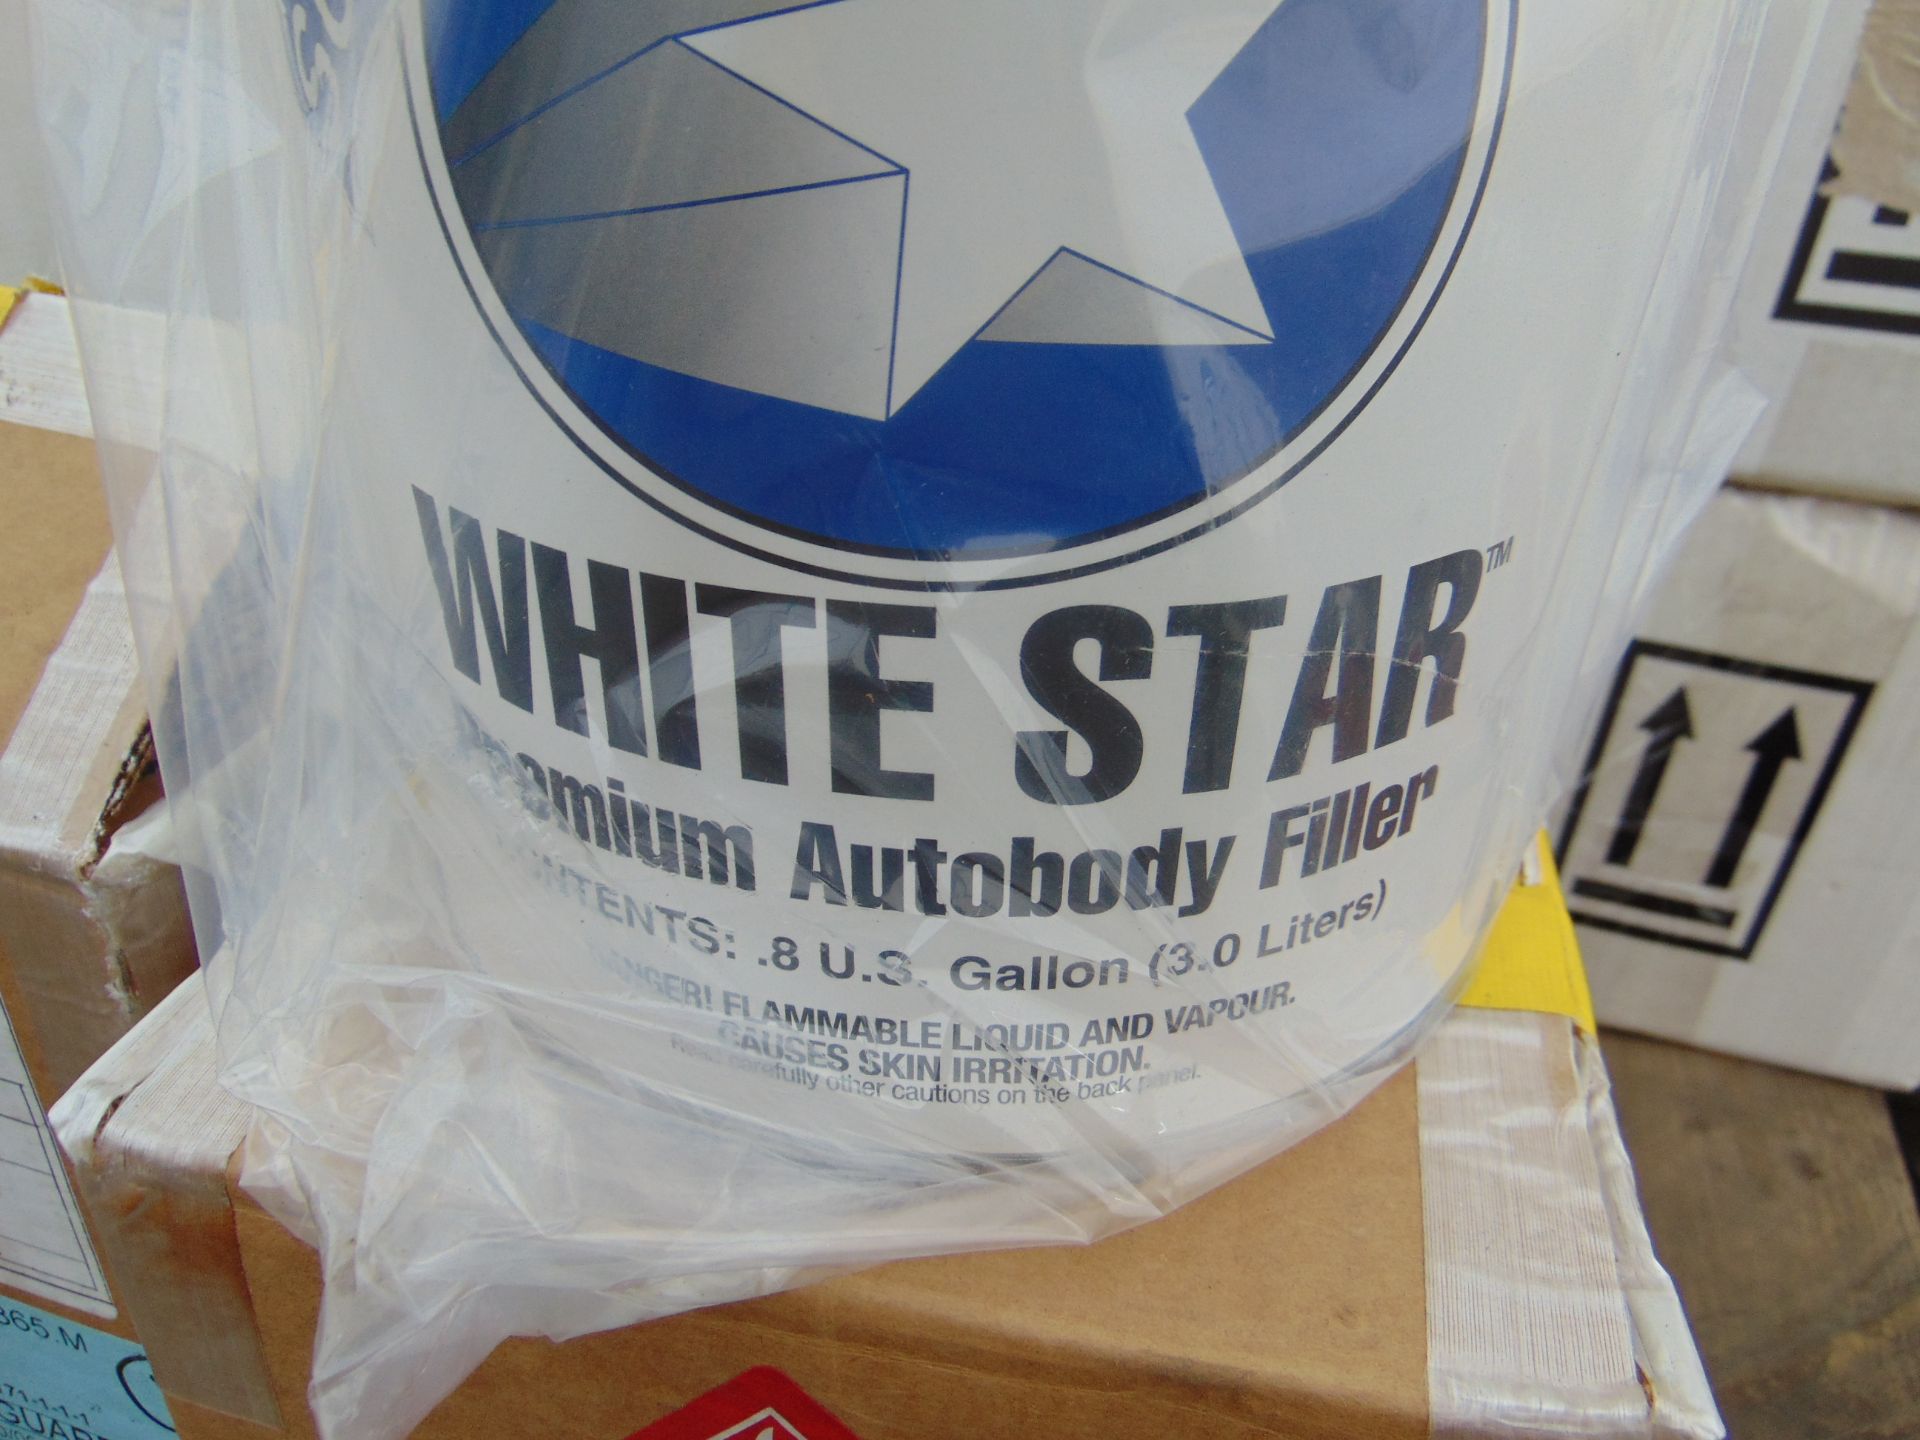 3x Unissued 3L Drums of Evercoat White Star Premium Autobody Filler Kits - Image 3 of 3